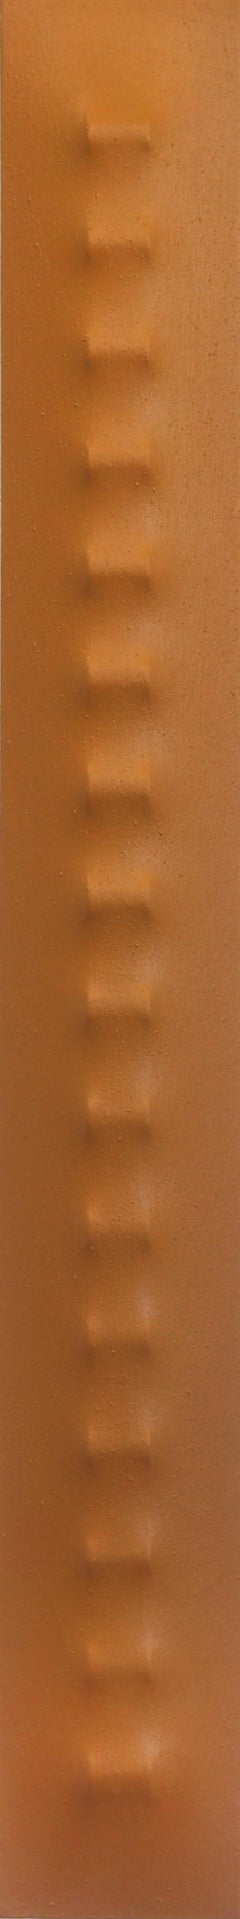 Used Slims CNY -  3-DIMENSIONAL ABSTRACT MINIMALIST MUSTARD YELLOW CANVAS PAINTINGS